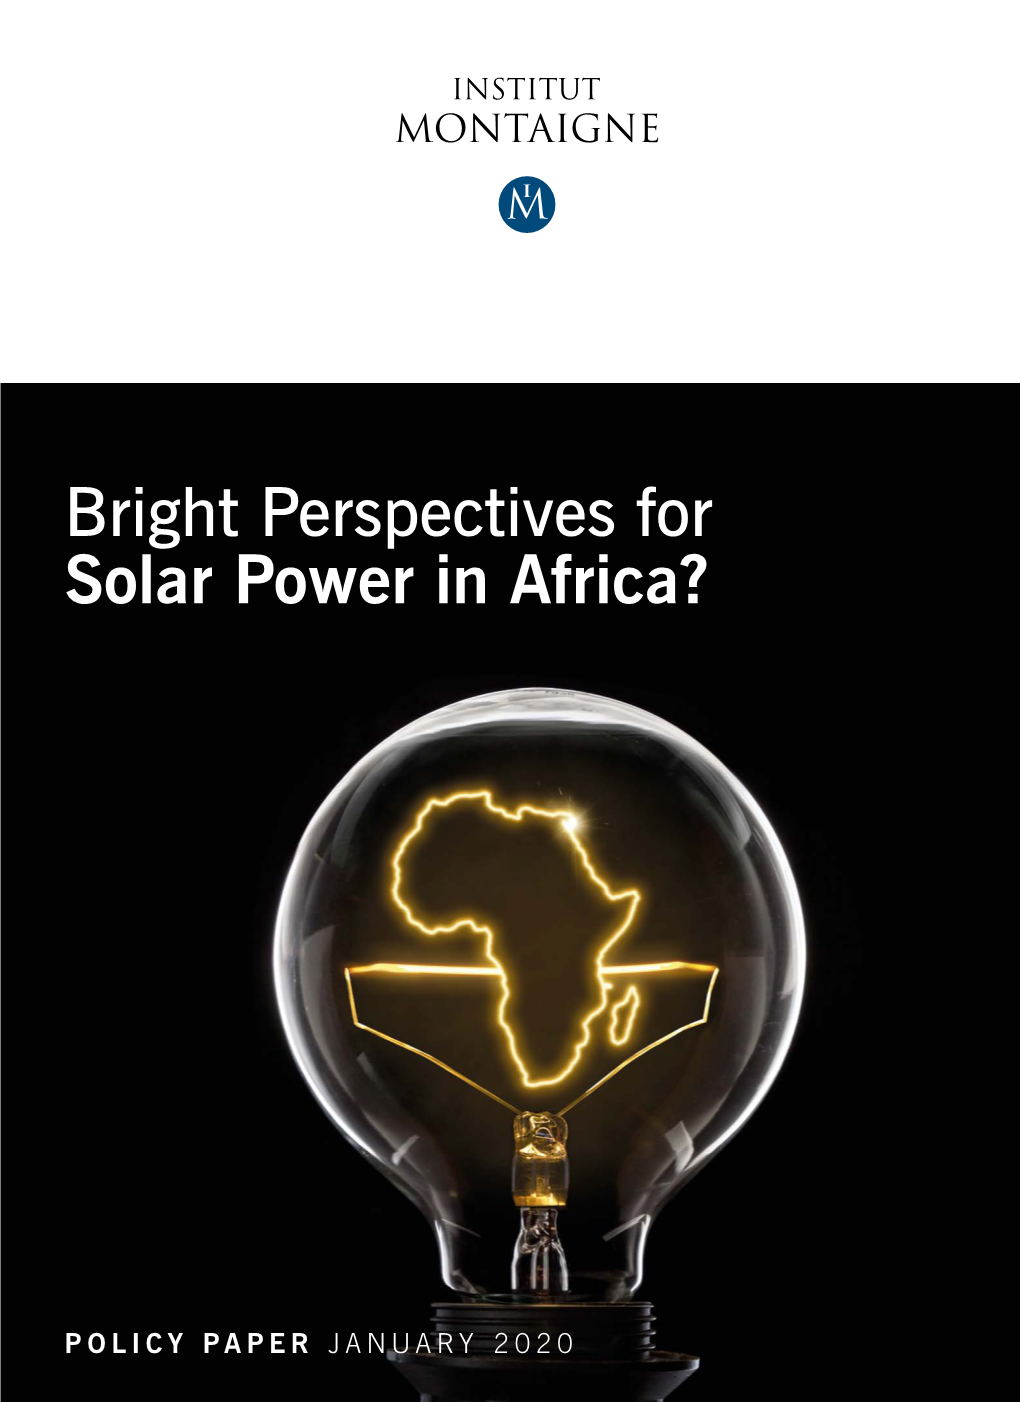 Bright Perspectives for Solar Power in Africa?